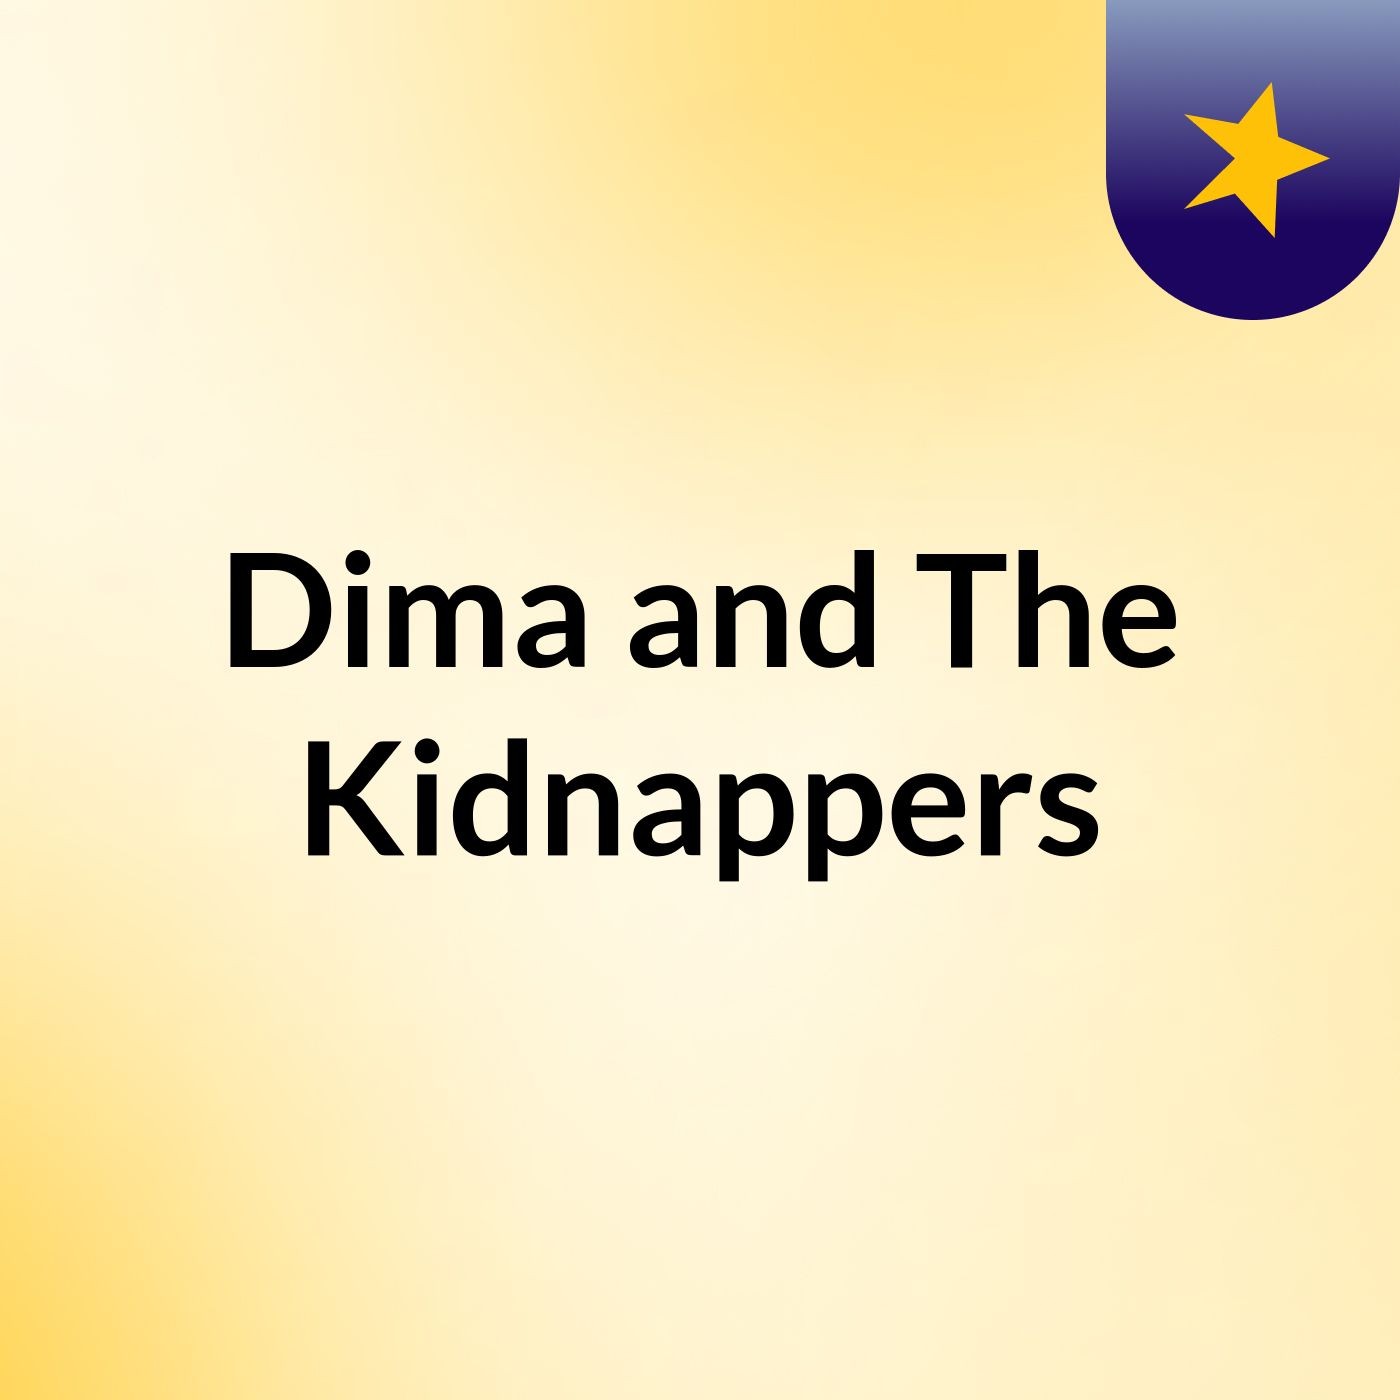 Dima and The Kidnappers